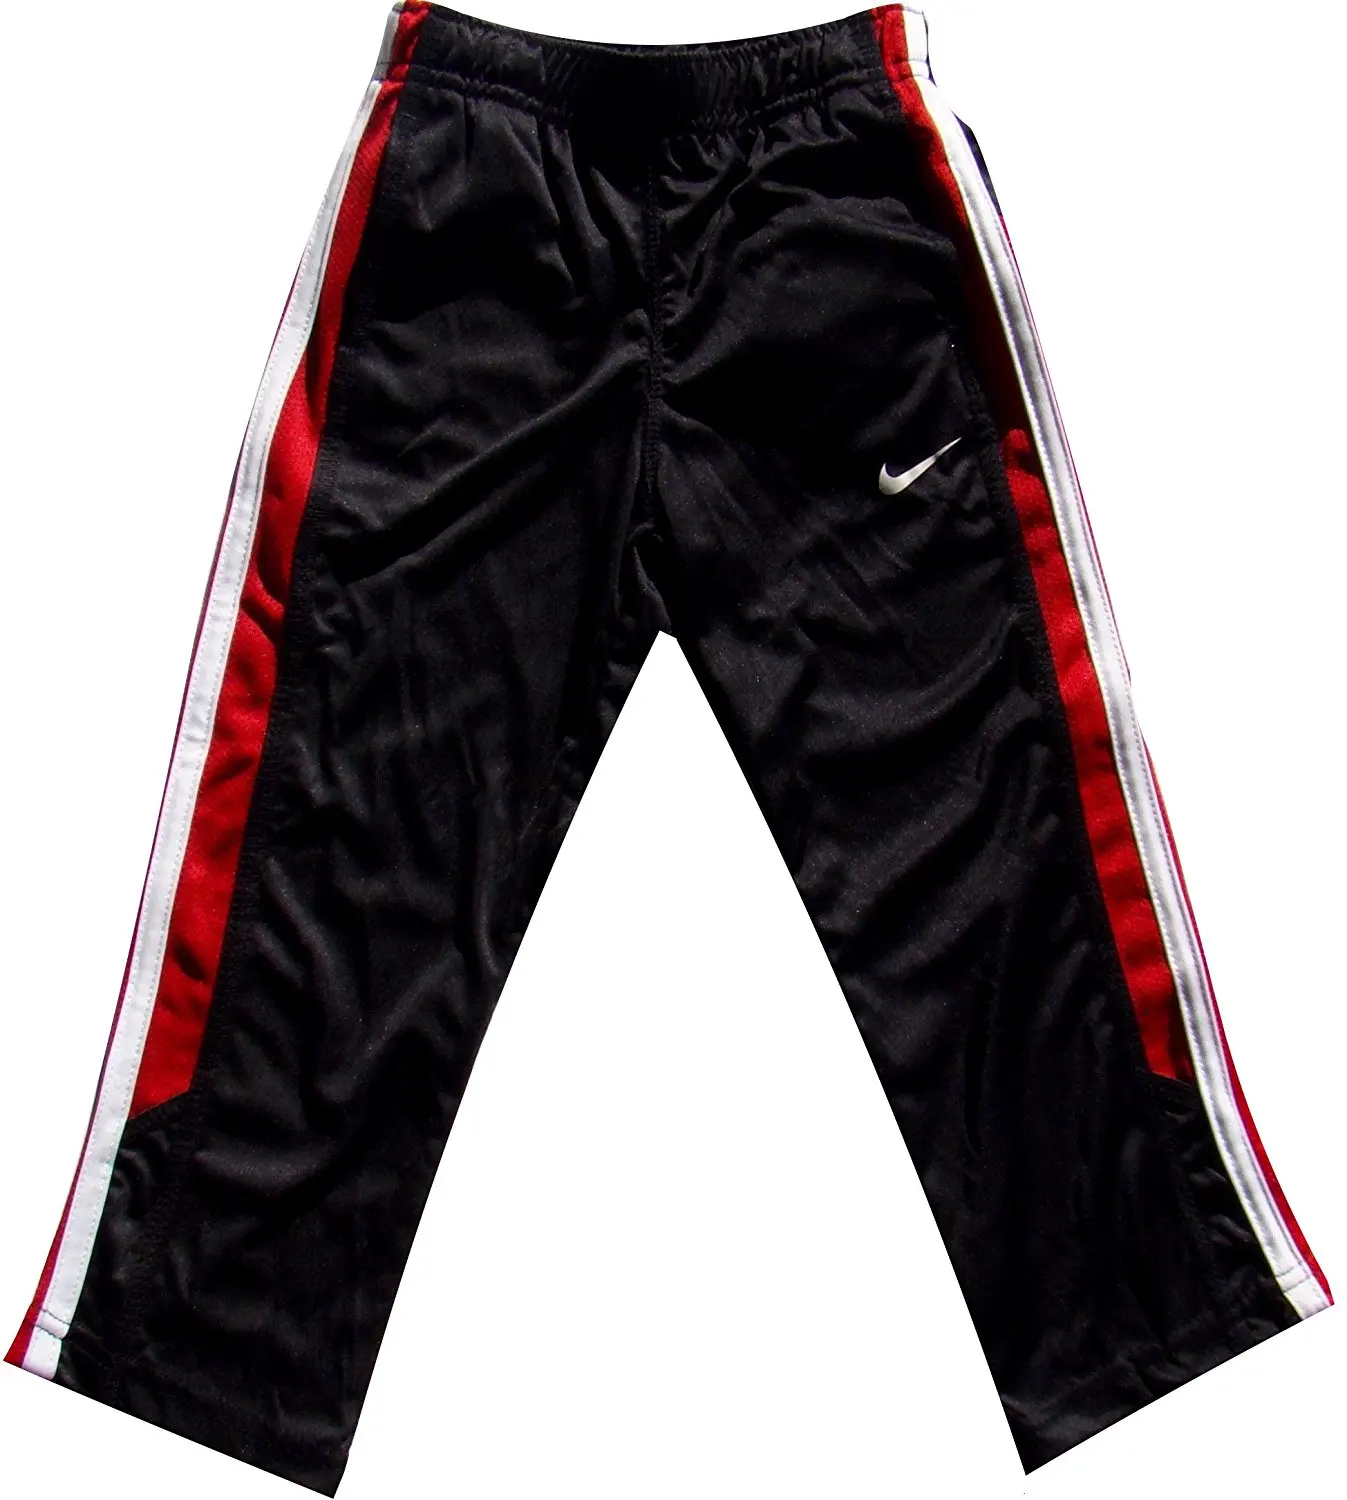 black pants with white and red stripes